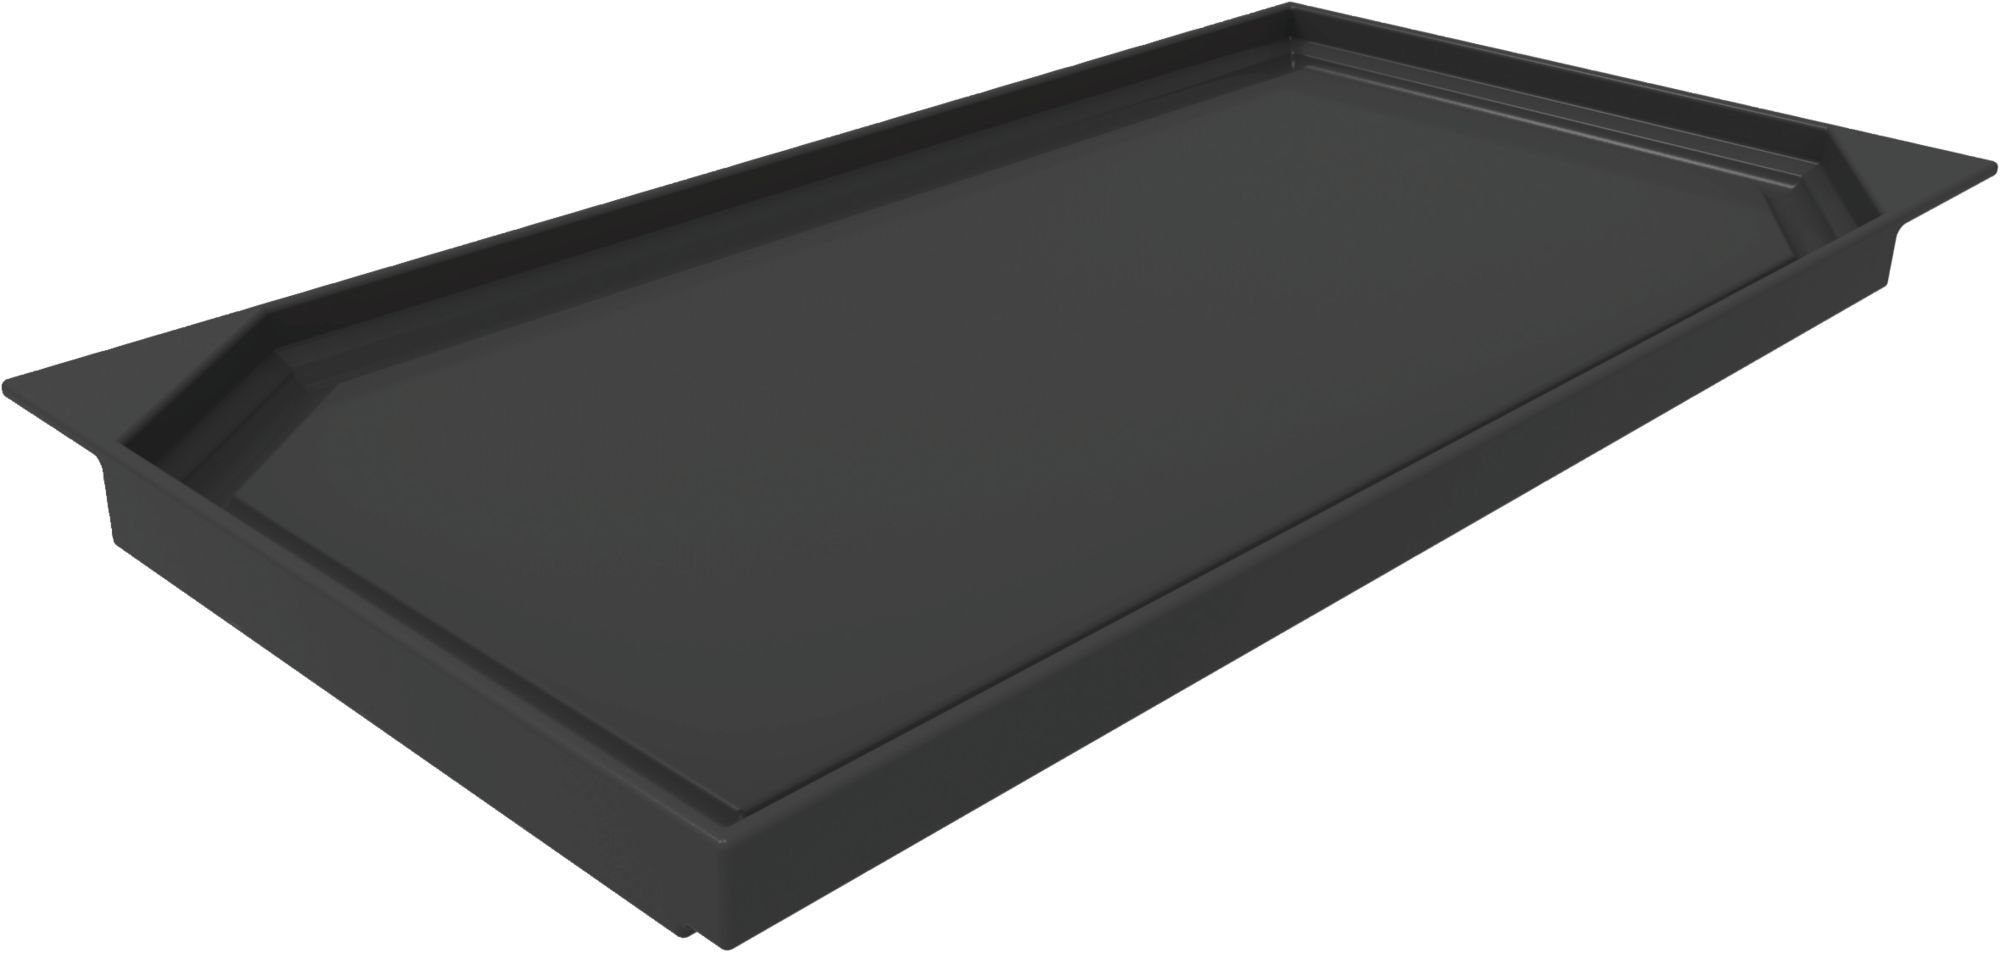 Thermador® Professional Series 12" Black Griddle Plate